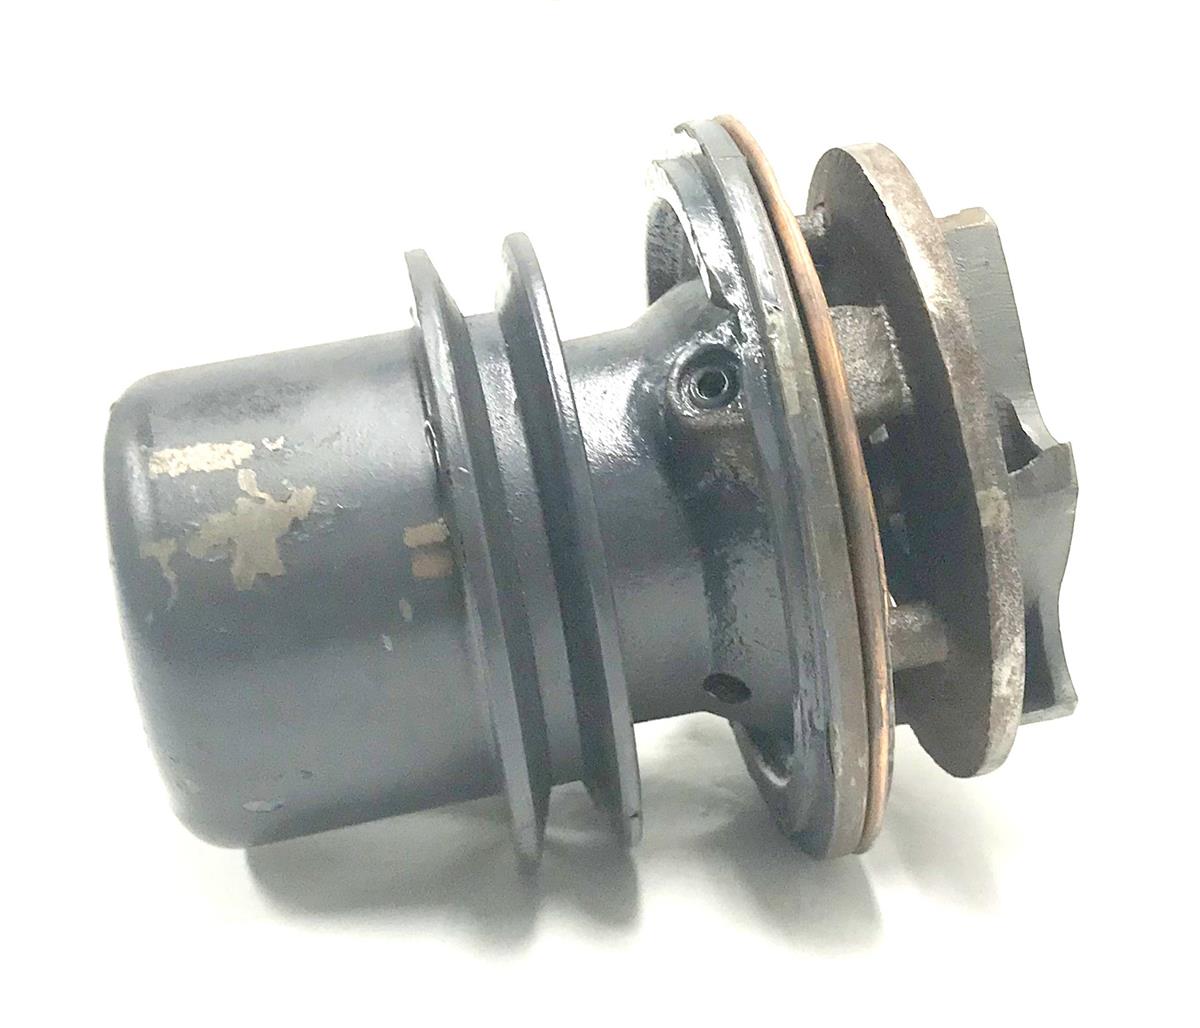 5T-666 | 5T-666  Engine Coolant  Water Pump with Pulley for M809 5-Ton Trucks (5).jpeg